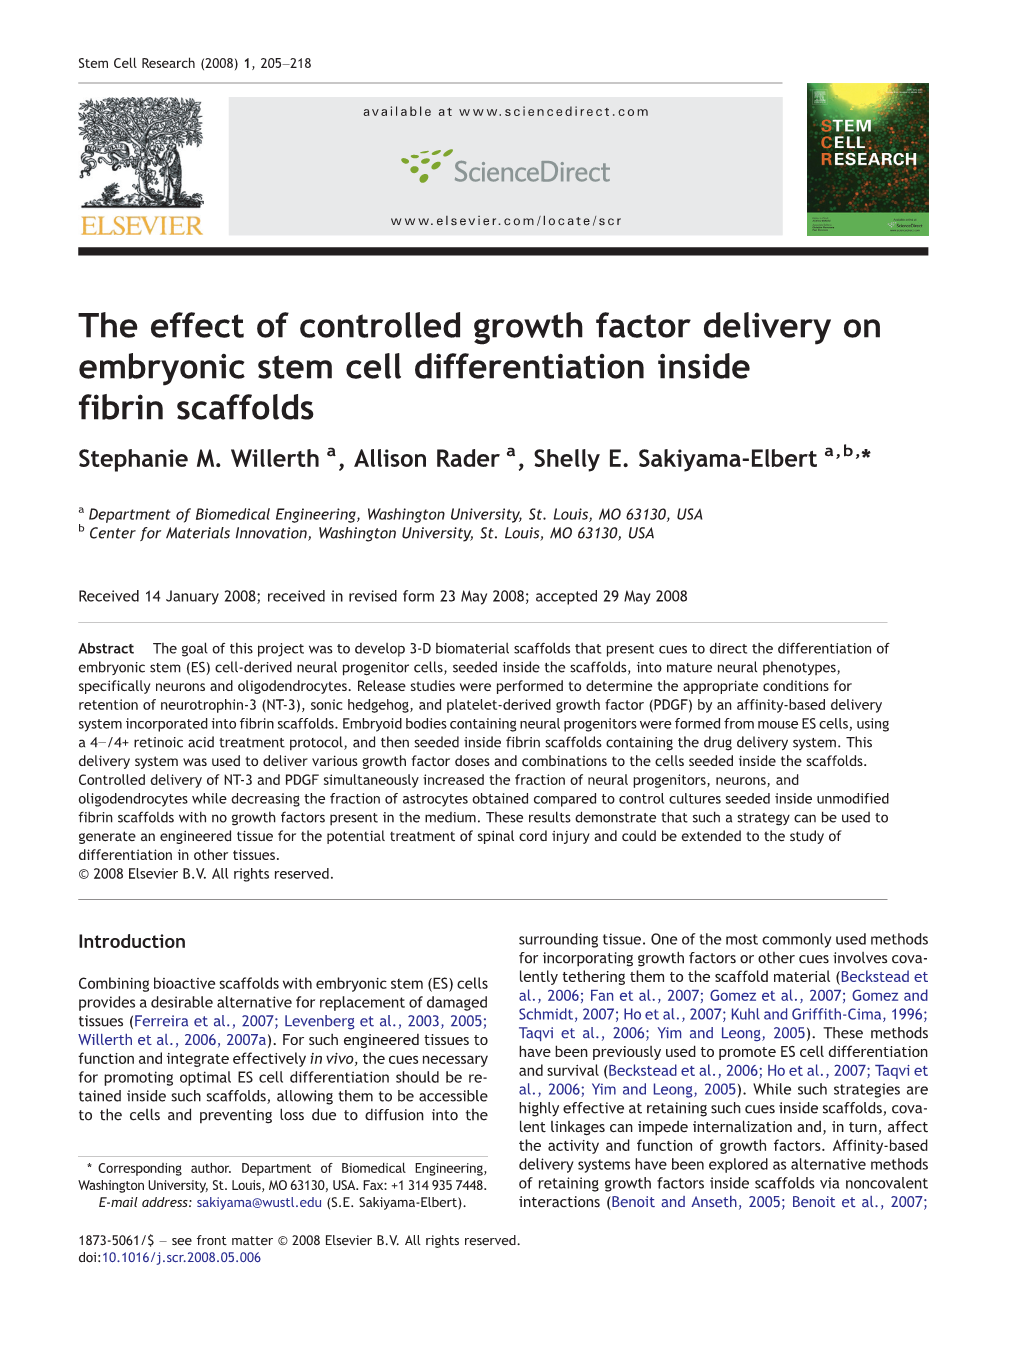 The Effect of Controlled Growth Factor Delivery on Embryonic Stem Cell Differentiation Inside Fibrin Scaffolds Stephanie M